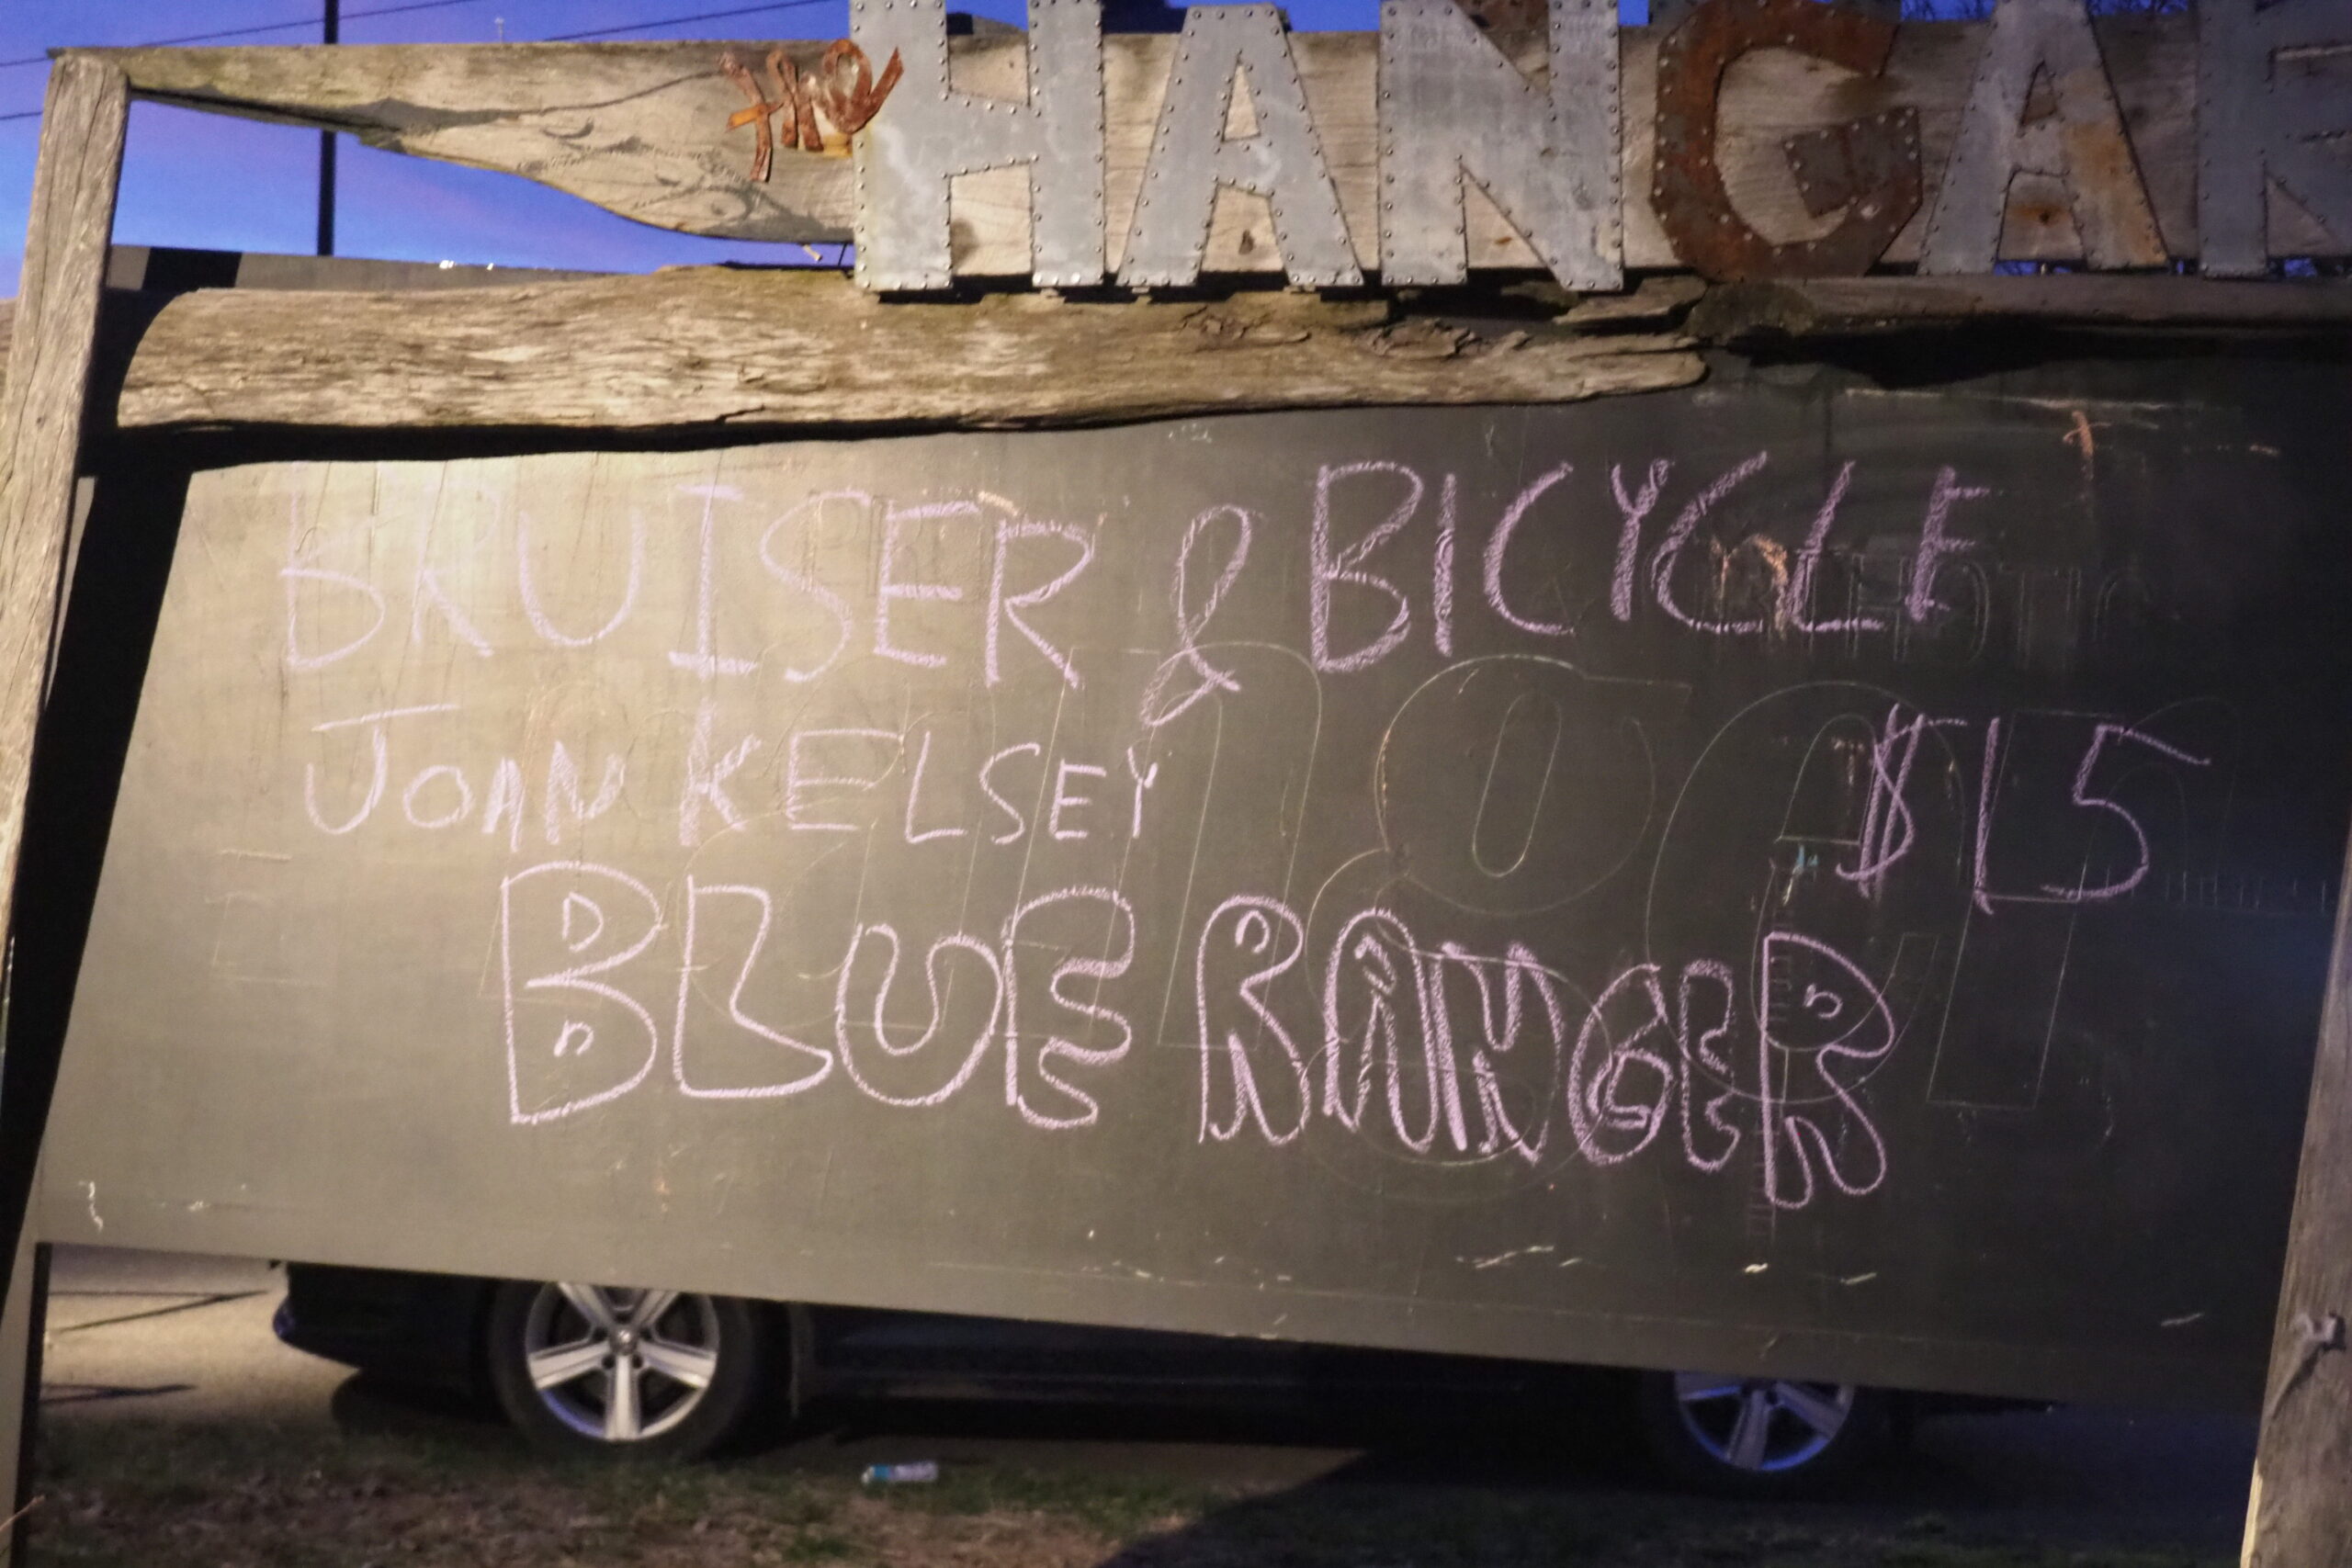 Bruiser and Bicycle CD Release Party - Hangar on the Hudson Trot 4/7